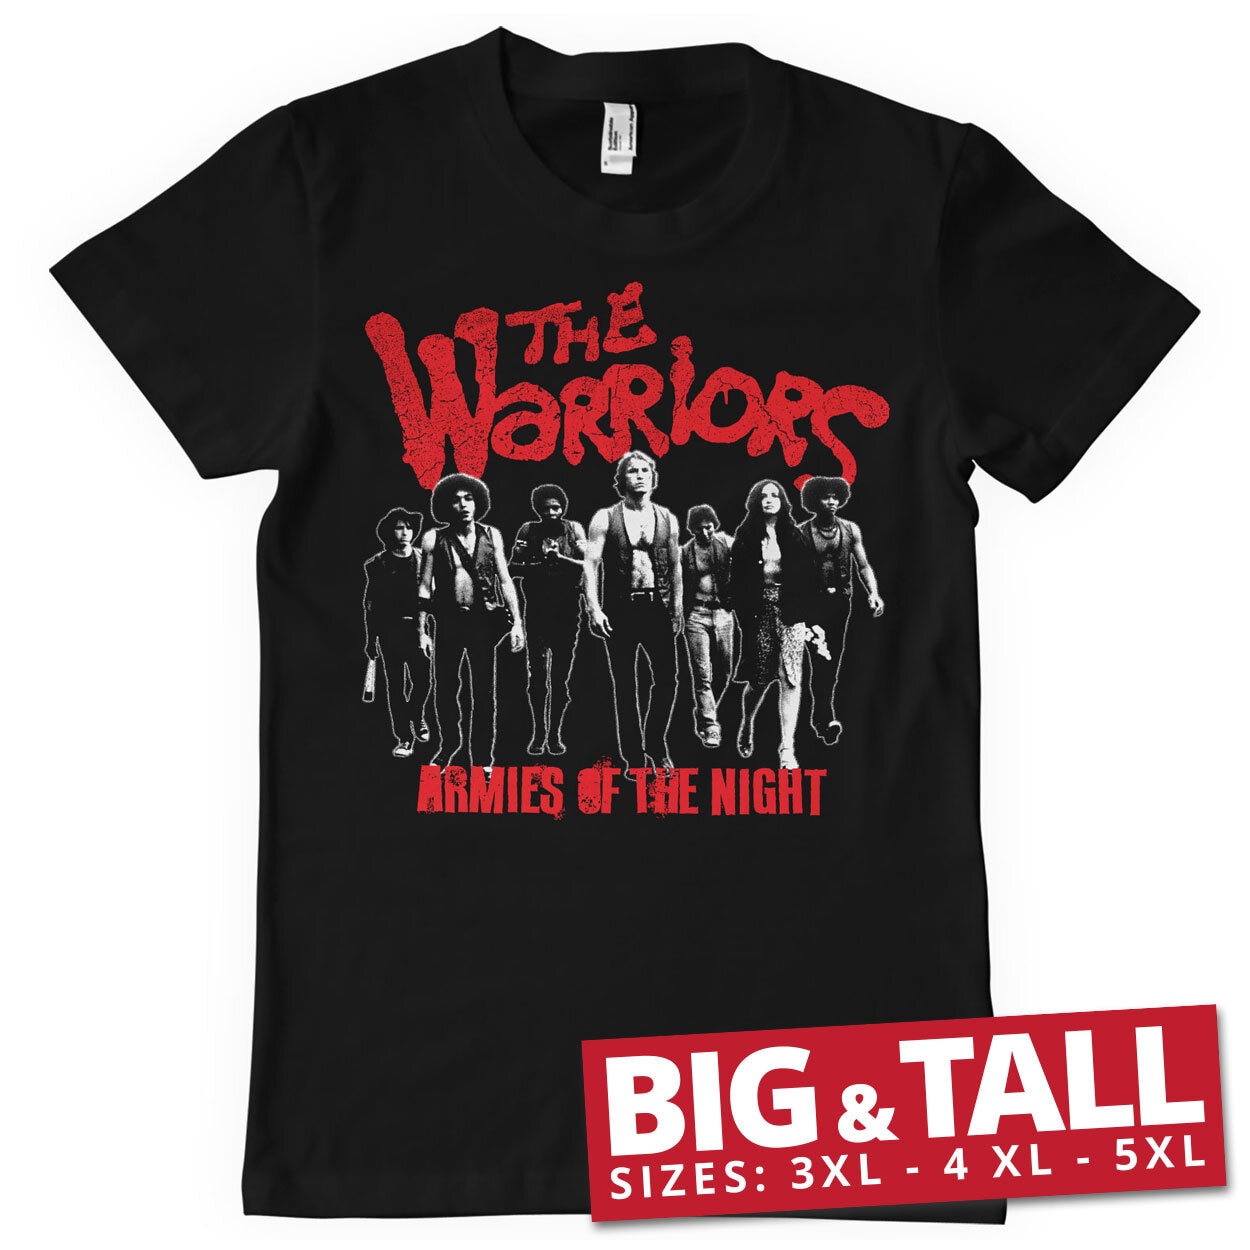 The Warriors - Armies Of The Night Big & Tall T-Shirt